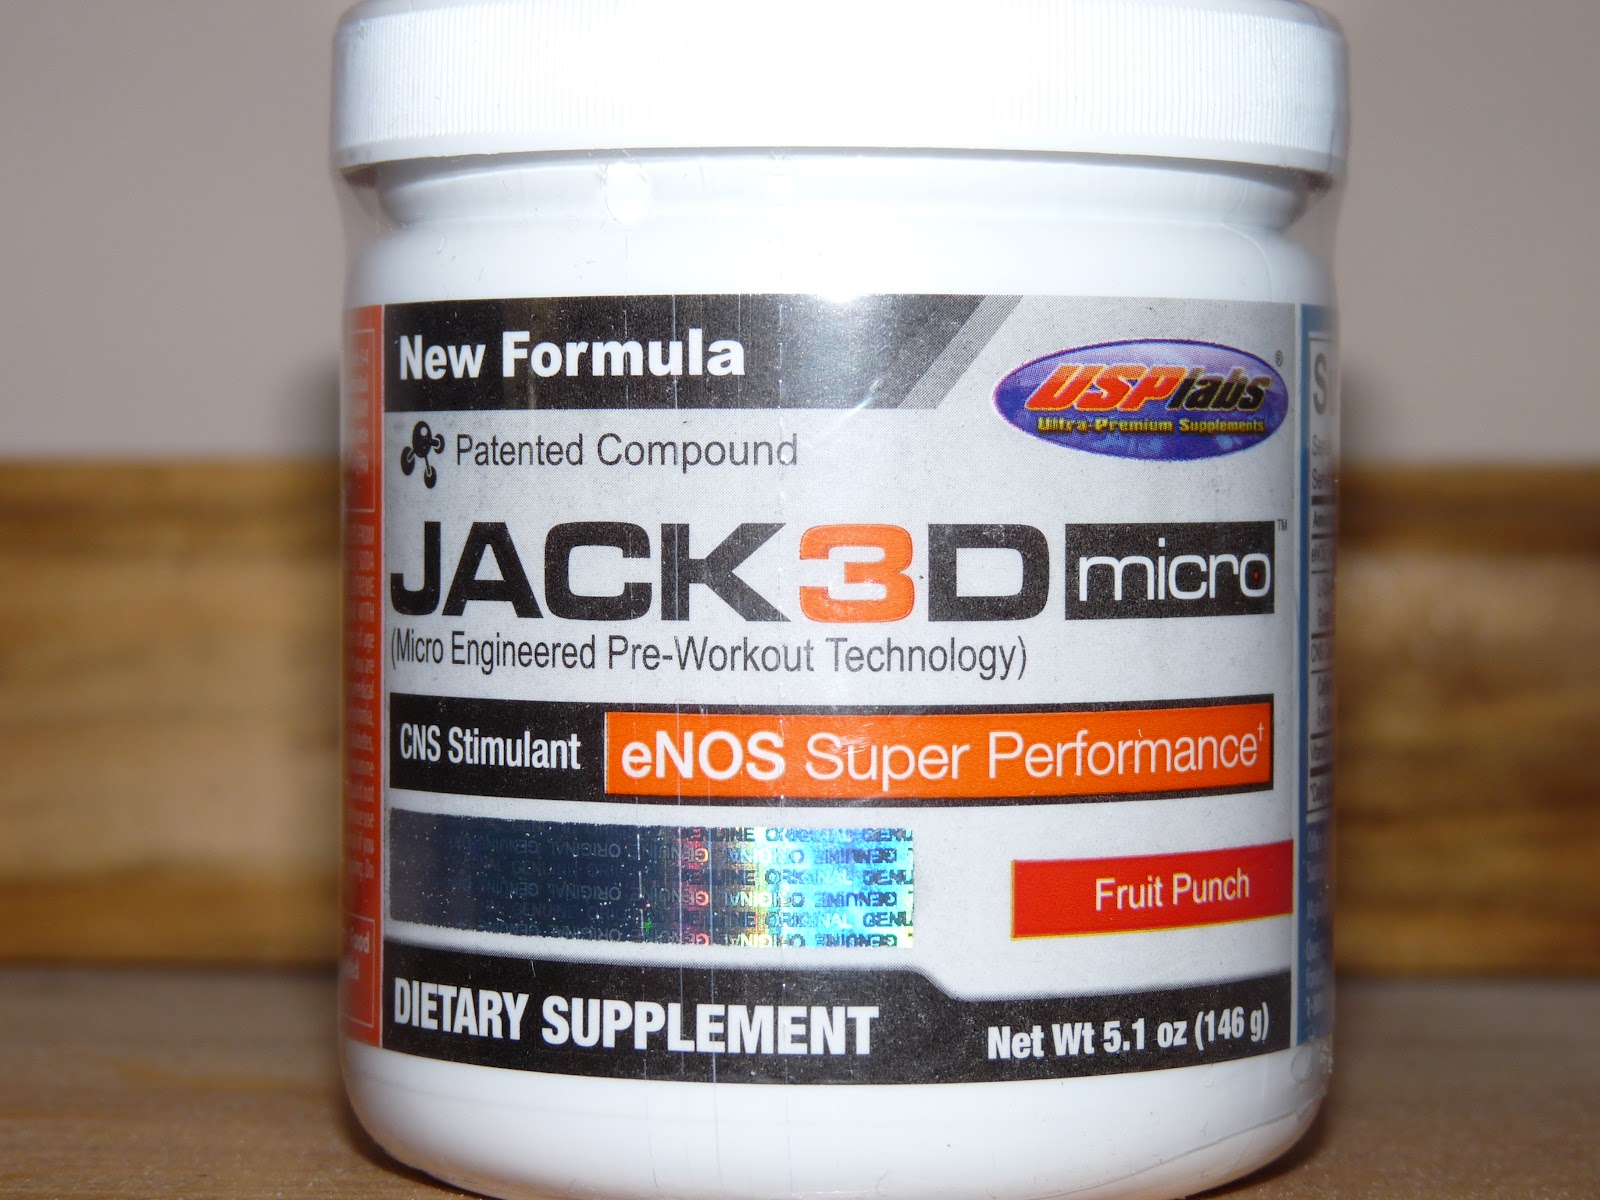 30 Minute Jacked workout supplement for Weight Loss